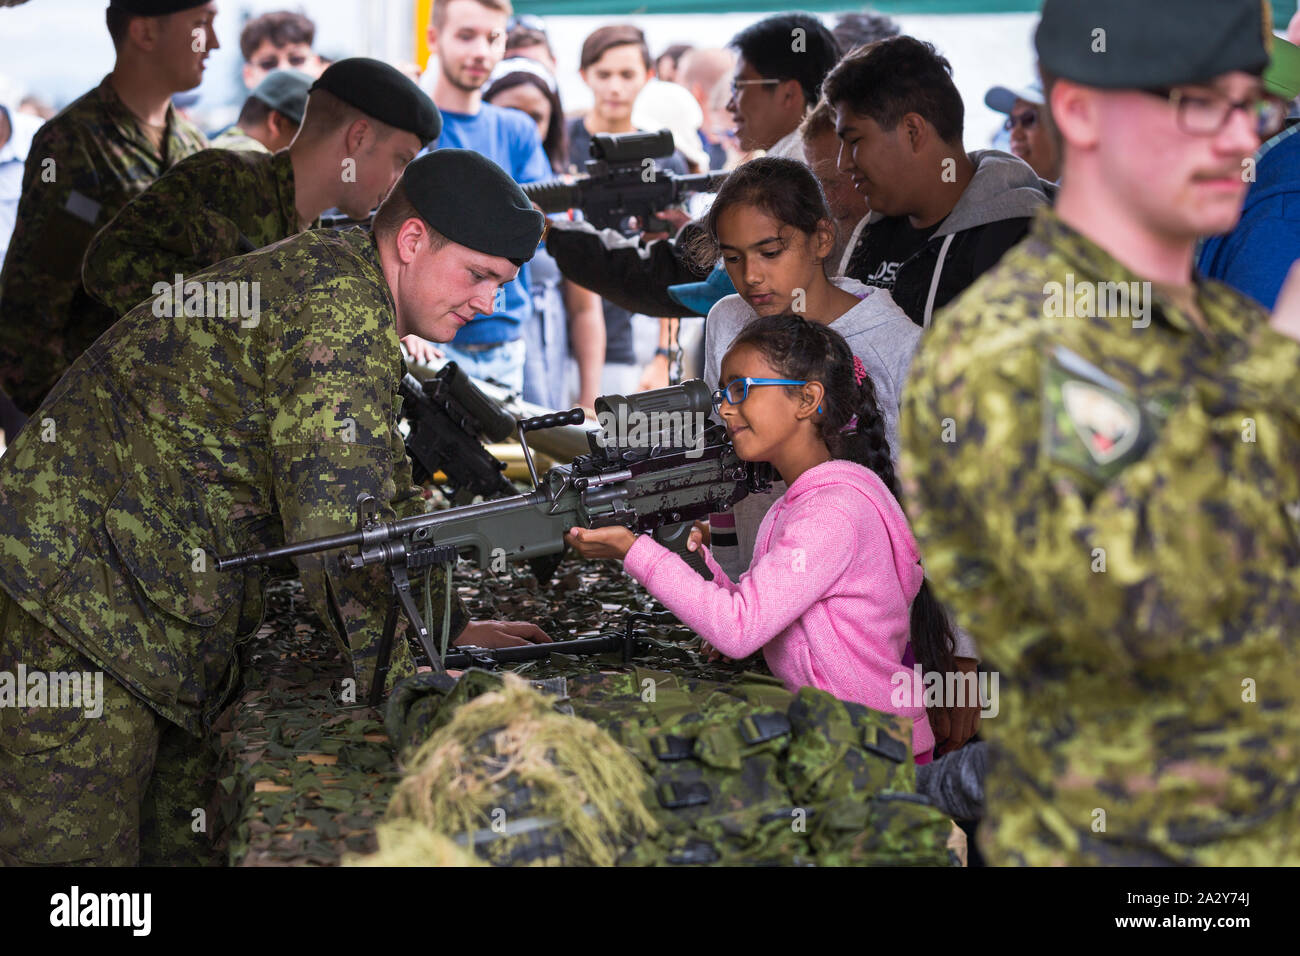 ABBOTSFORD, BC, CANADA - AUG 11, 2019: A Canadian Armed Forces soldier showing children an automatic rifle at the Abbotsford International Airshow. Stock Photo